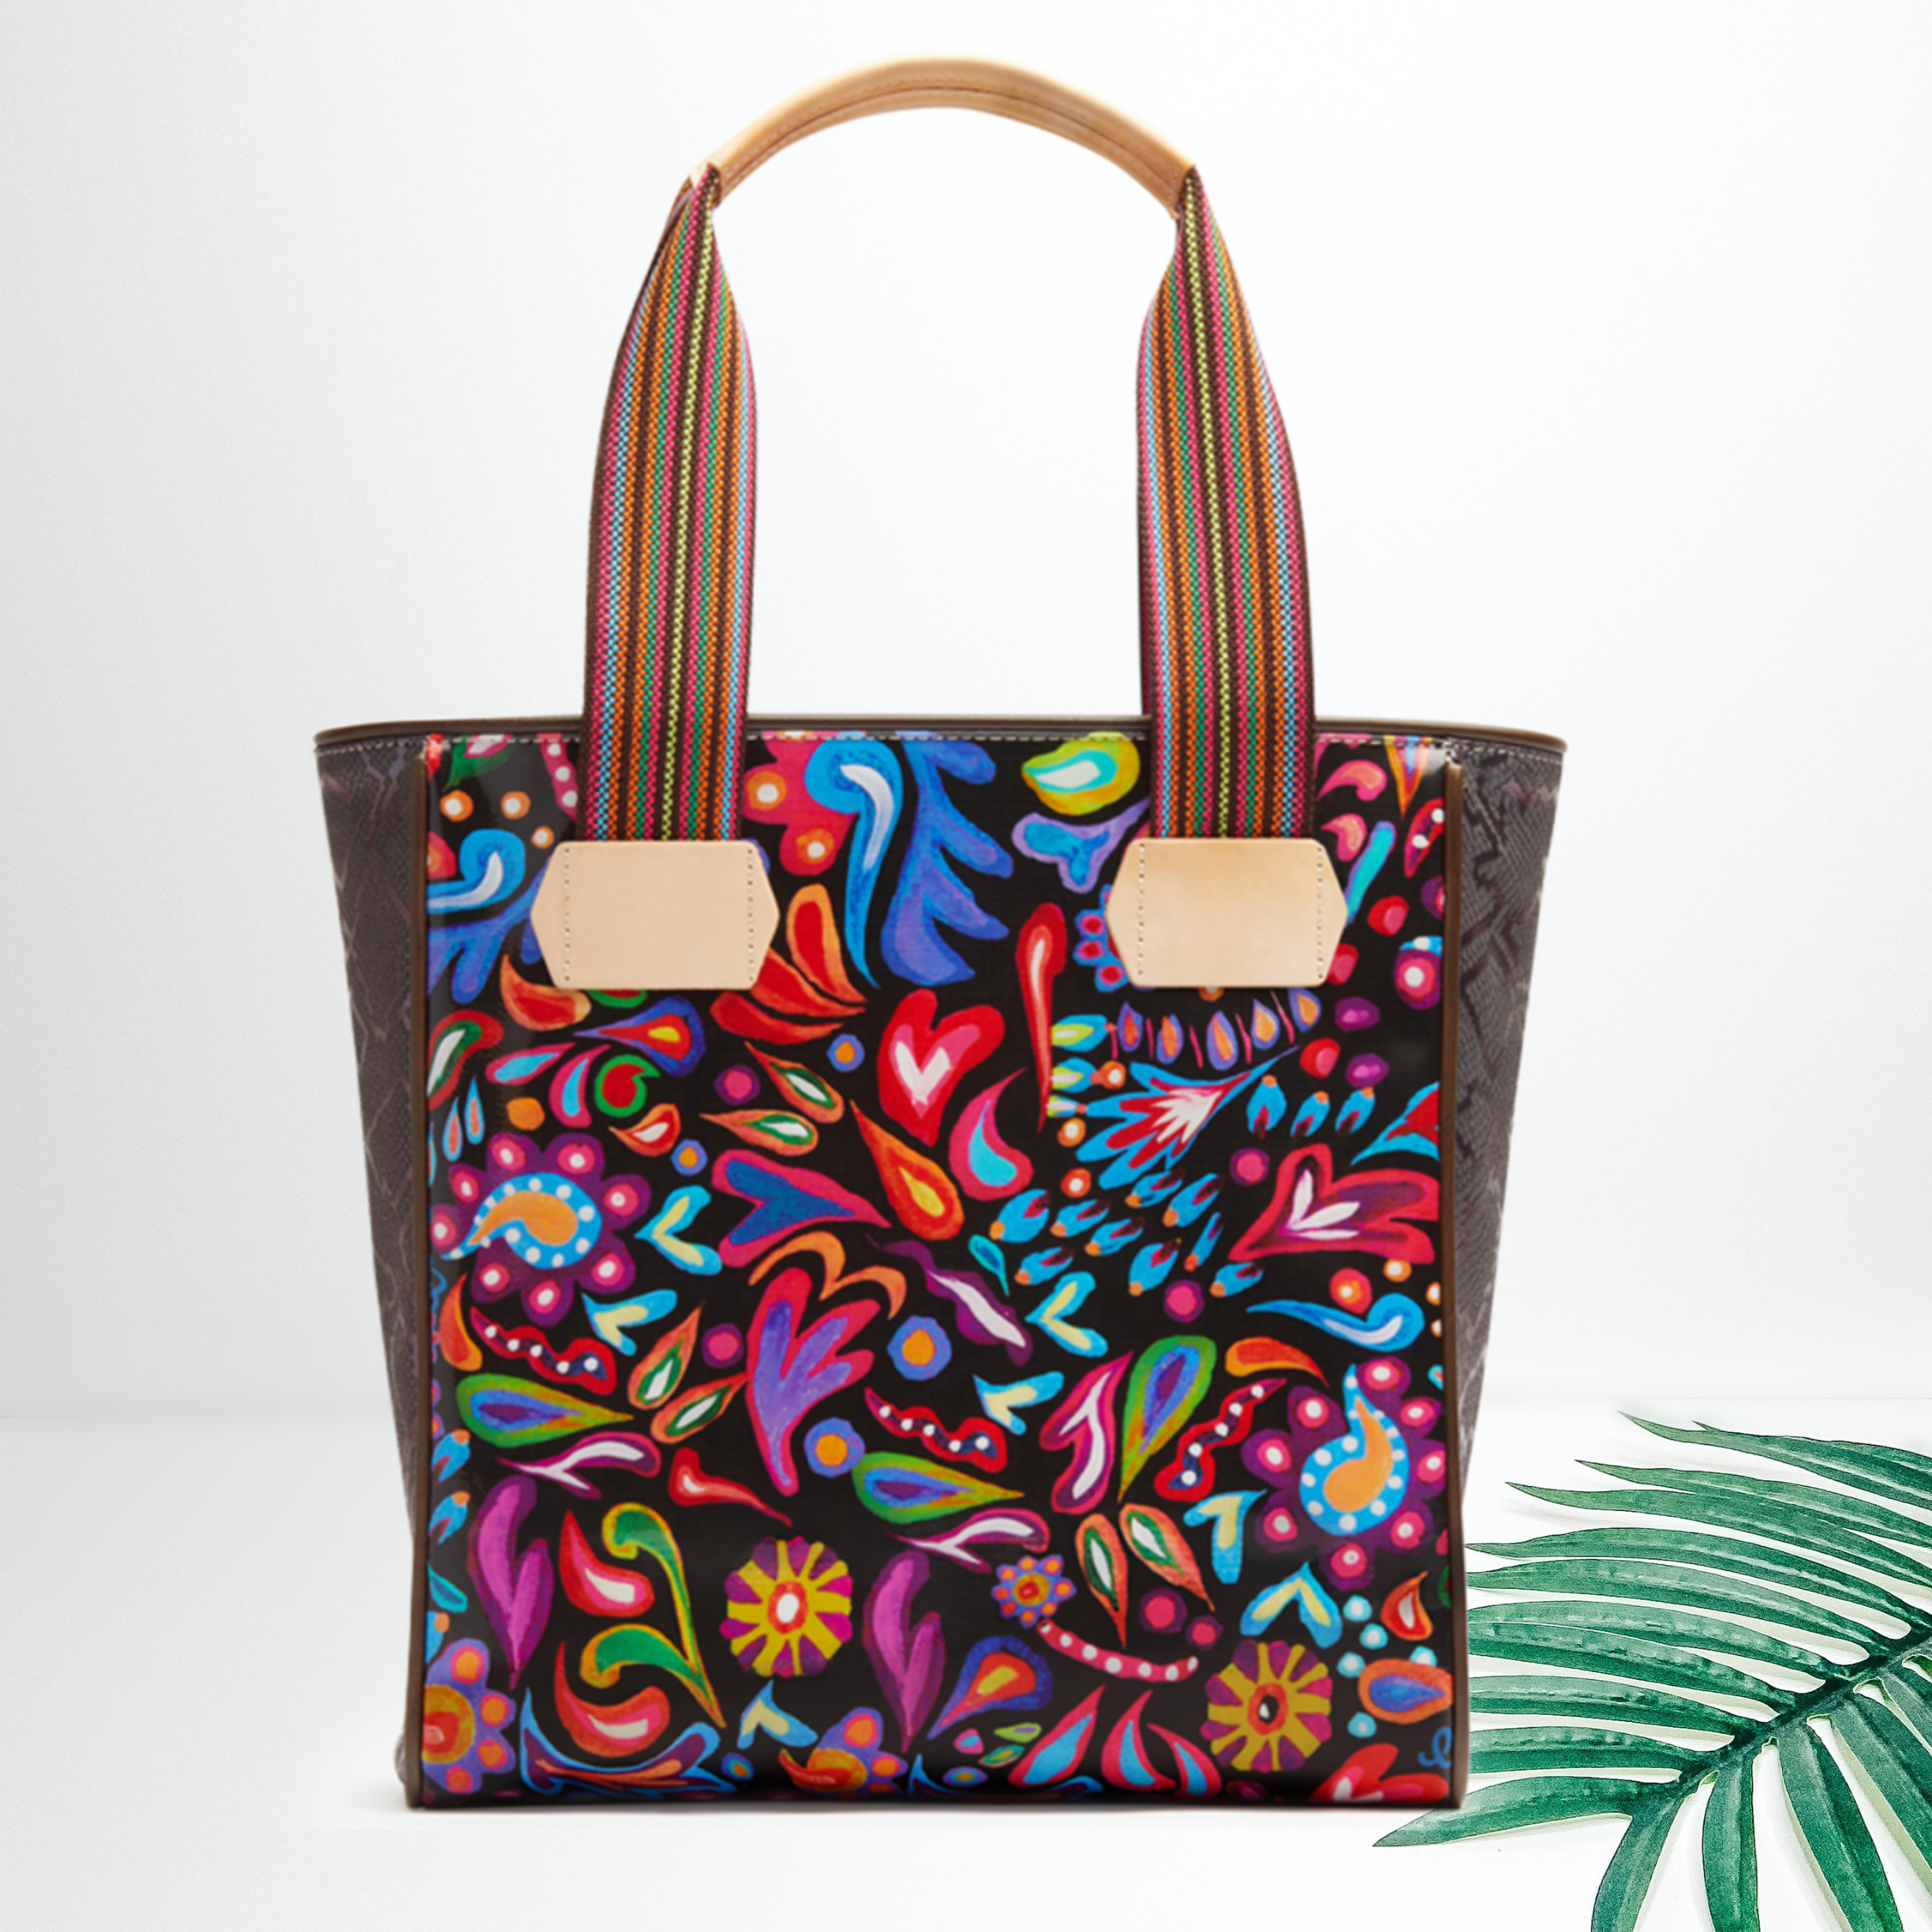 A large shoulder tote that is black with a colorful paisley print. Pictured on white background with a palm leaf.